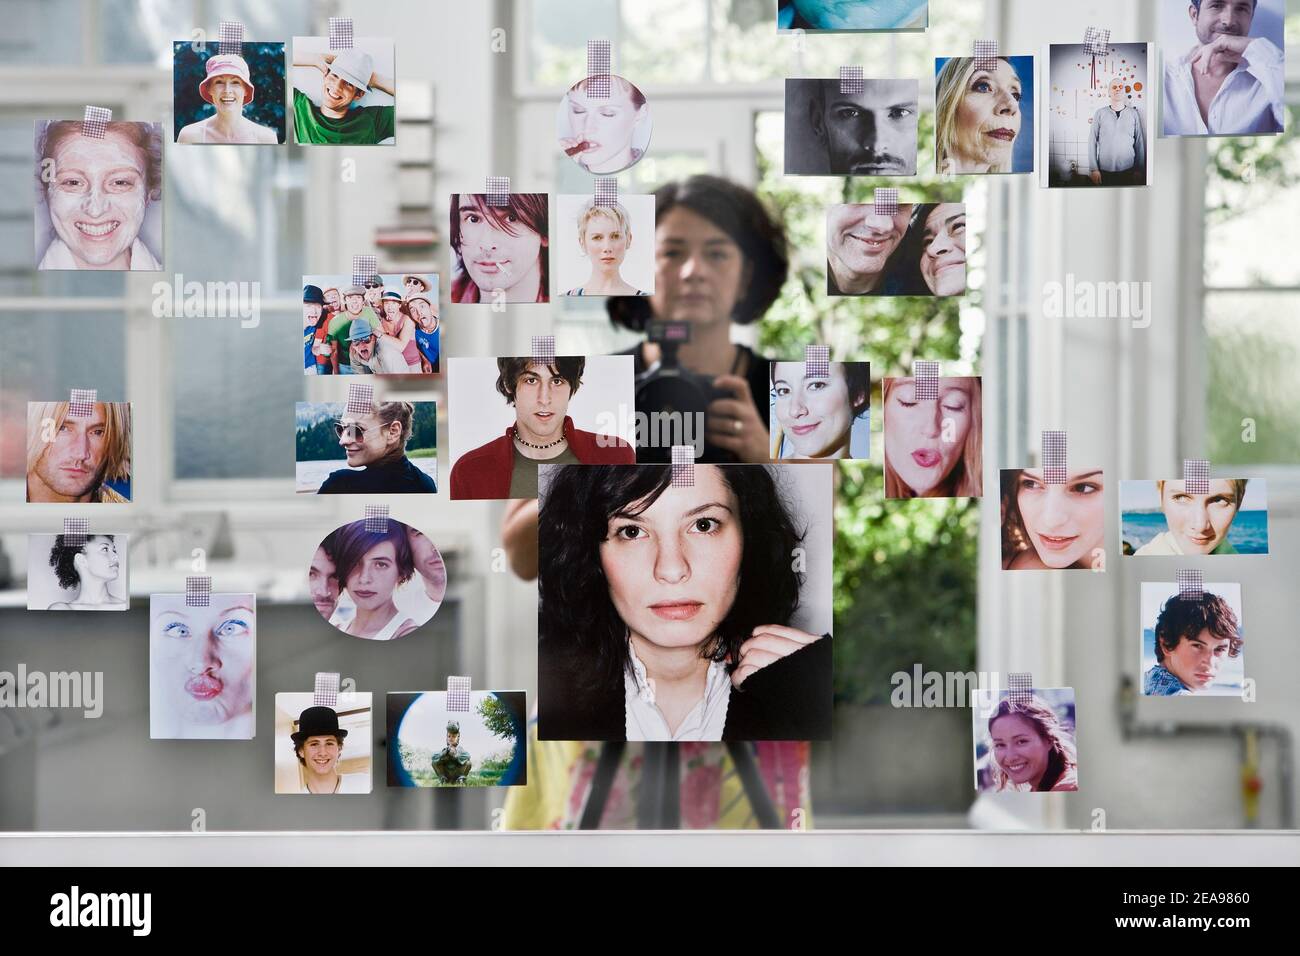 Woman photographed in a mirror, pasted with many portrait photos, in the background a door to the outside is reflected Stock Photo